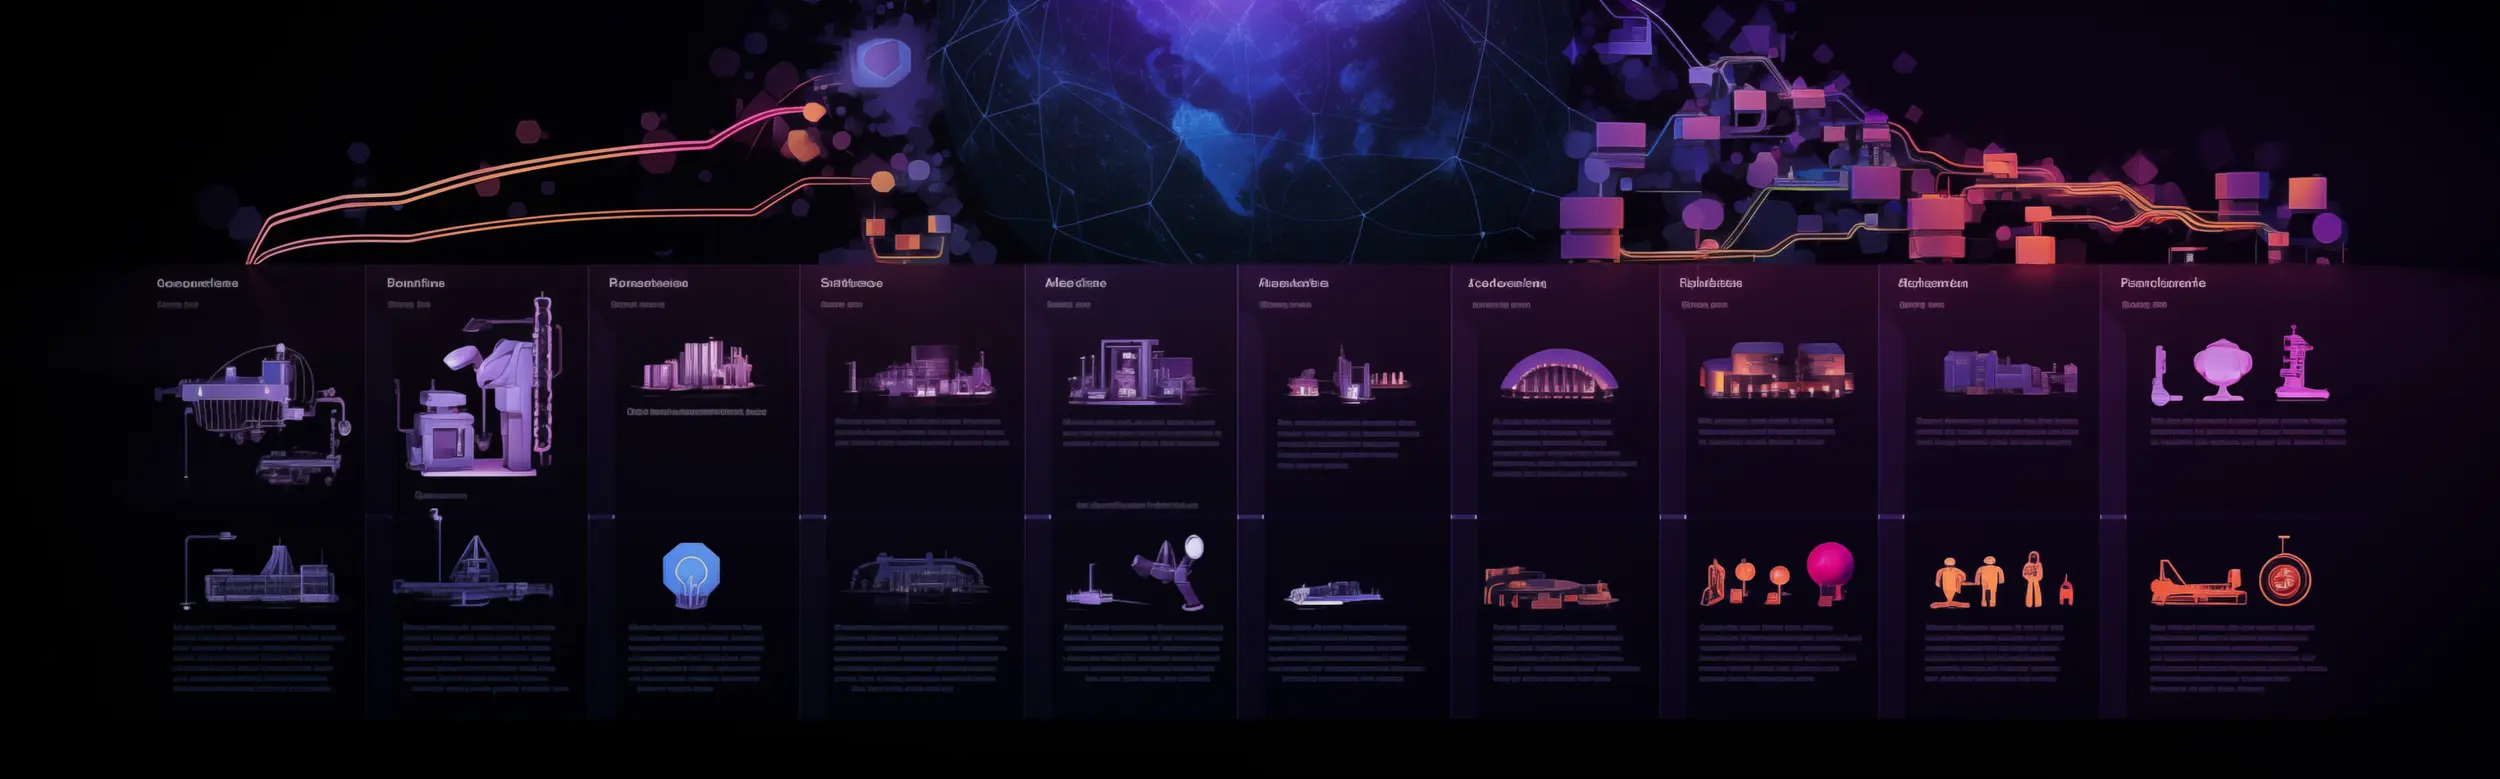 An informative graphic with a dark background, showcasing a timeline of technological progress across various categories. The timeline is depicted with interconnected lines and nodes, emphasizing the evolution and interconnection of different technologies. Each category is represented by vibrant purple and pink illustrations and accompanied by a brief description in white text.